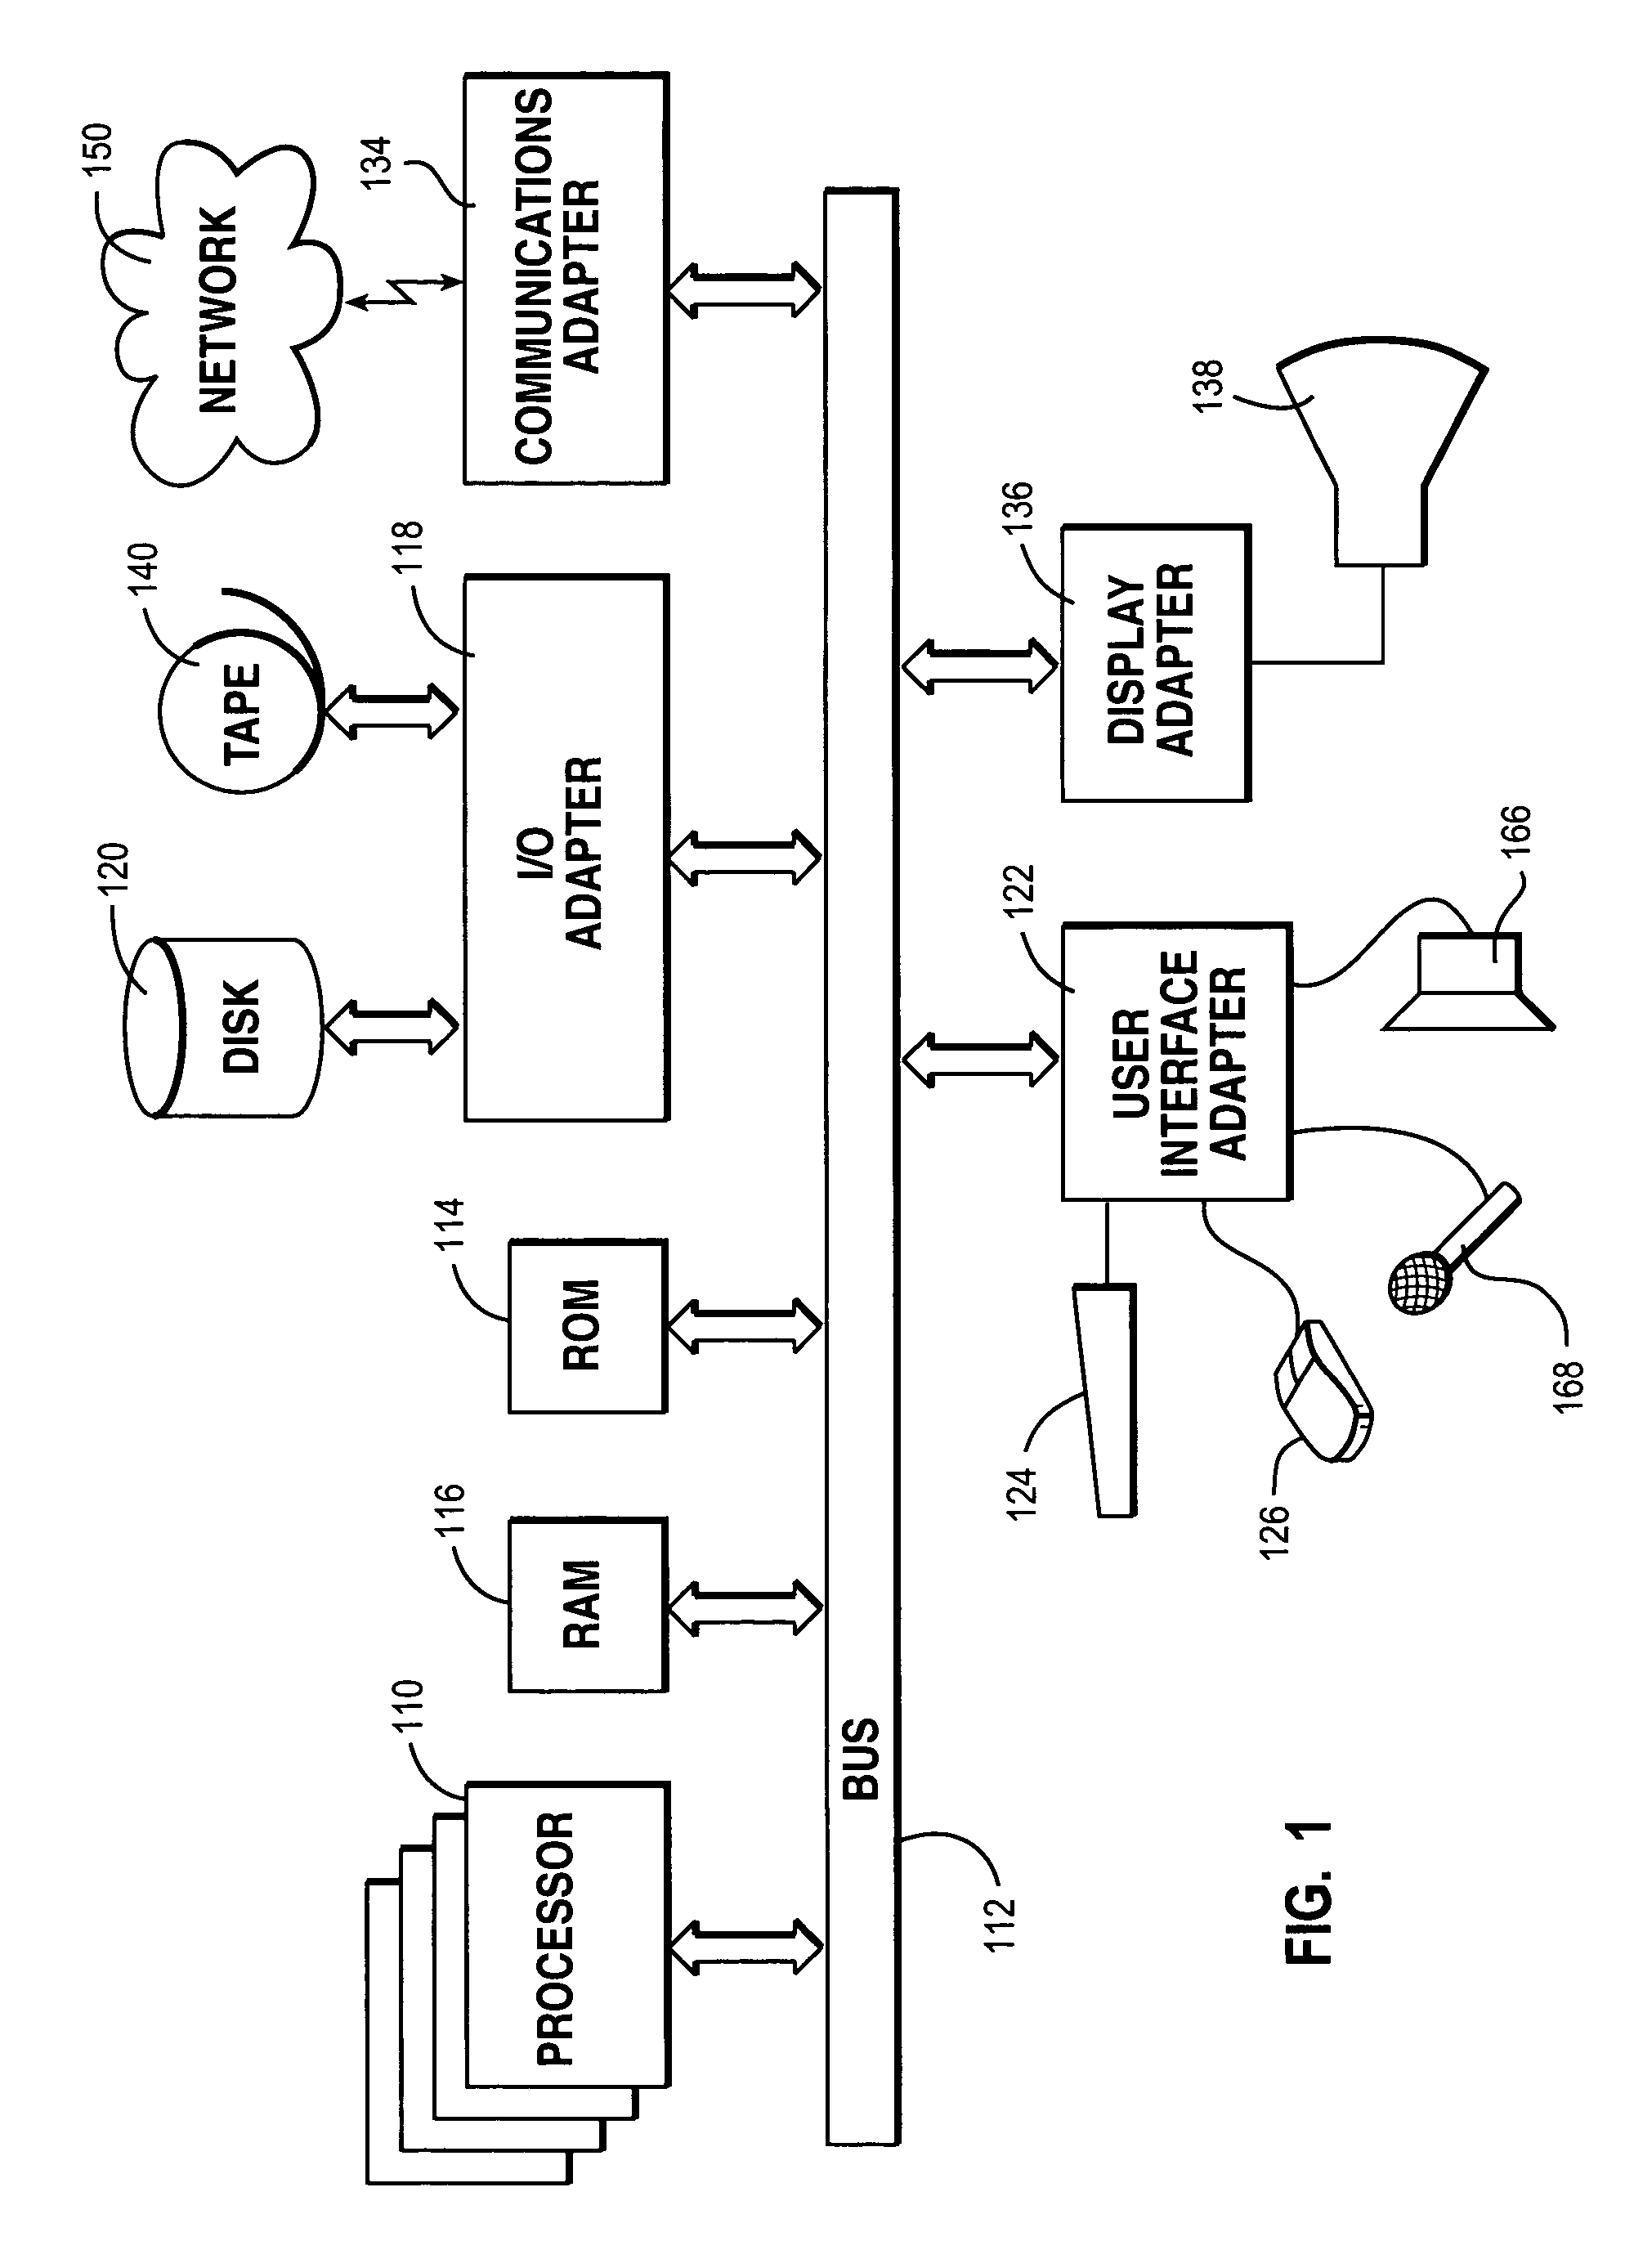 System and method for achieving autonomic computing self-healing, utilizing meta level reflection and reasoning